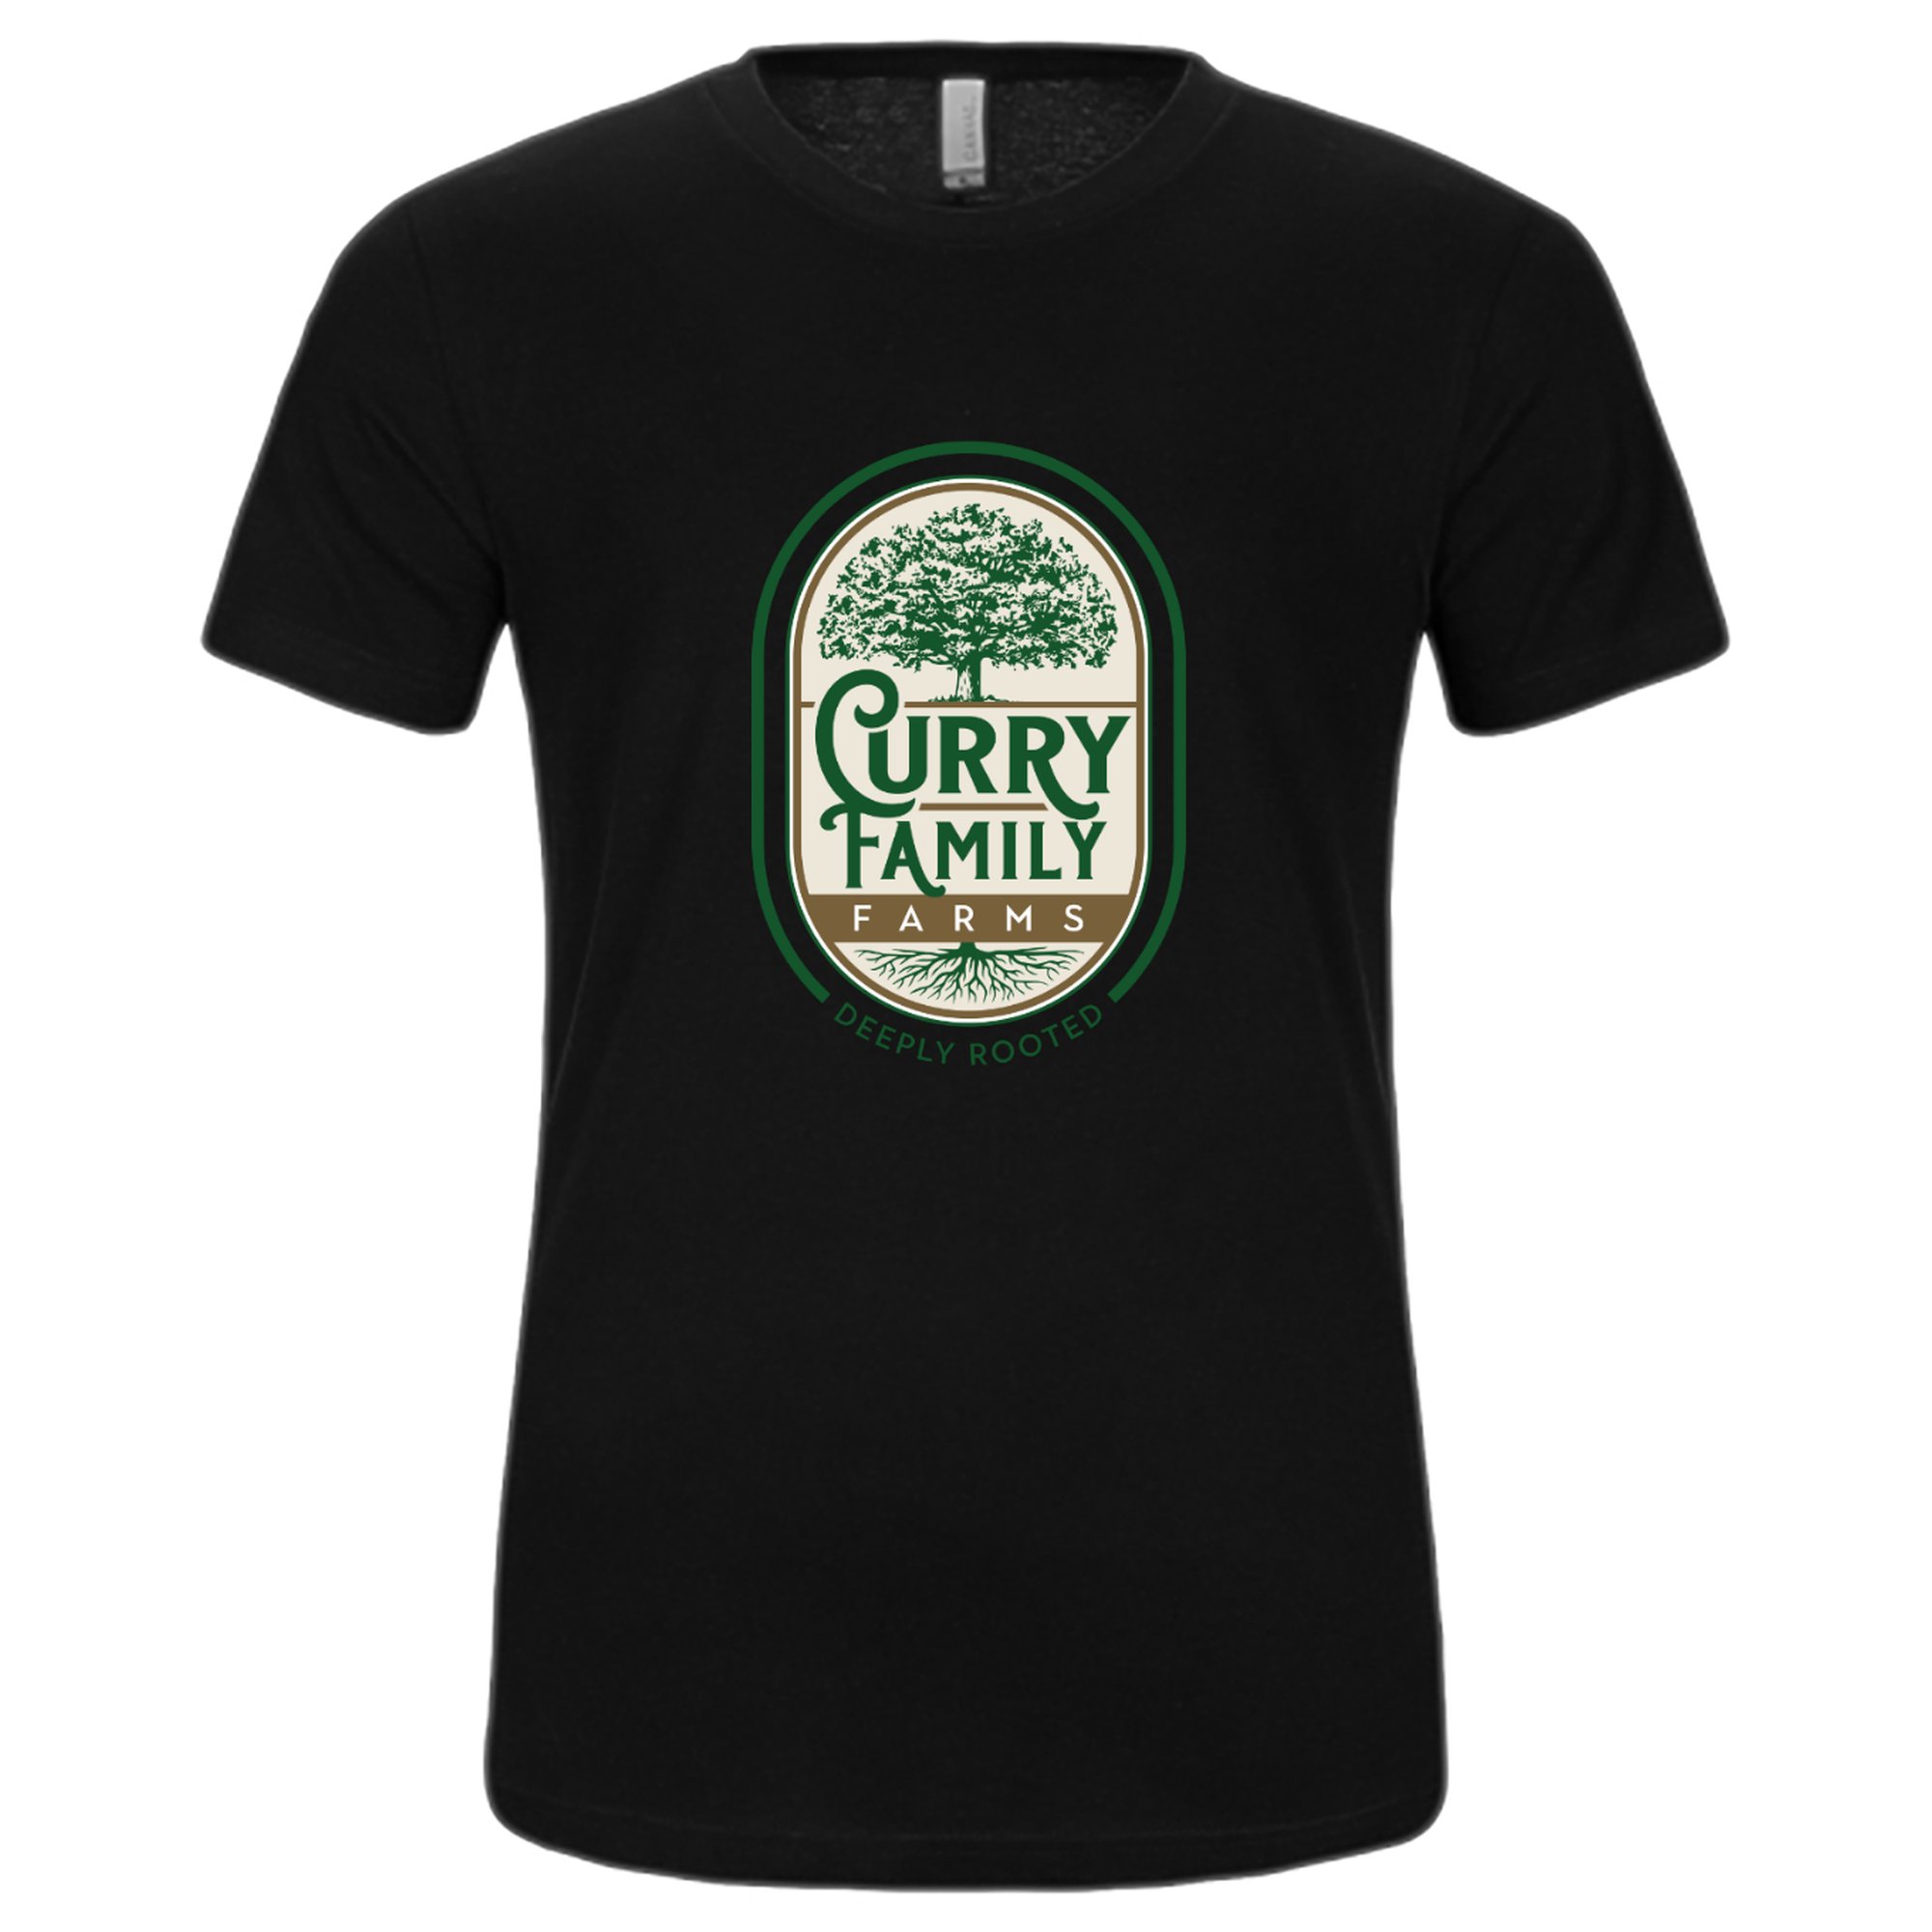 Curry Farms T-Shirt Large